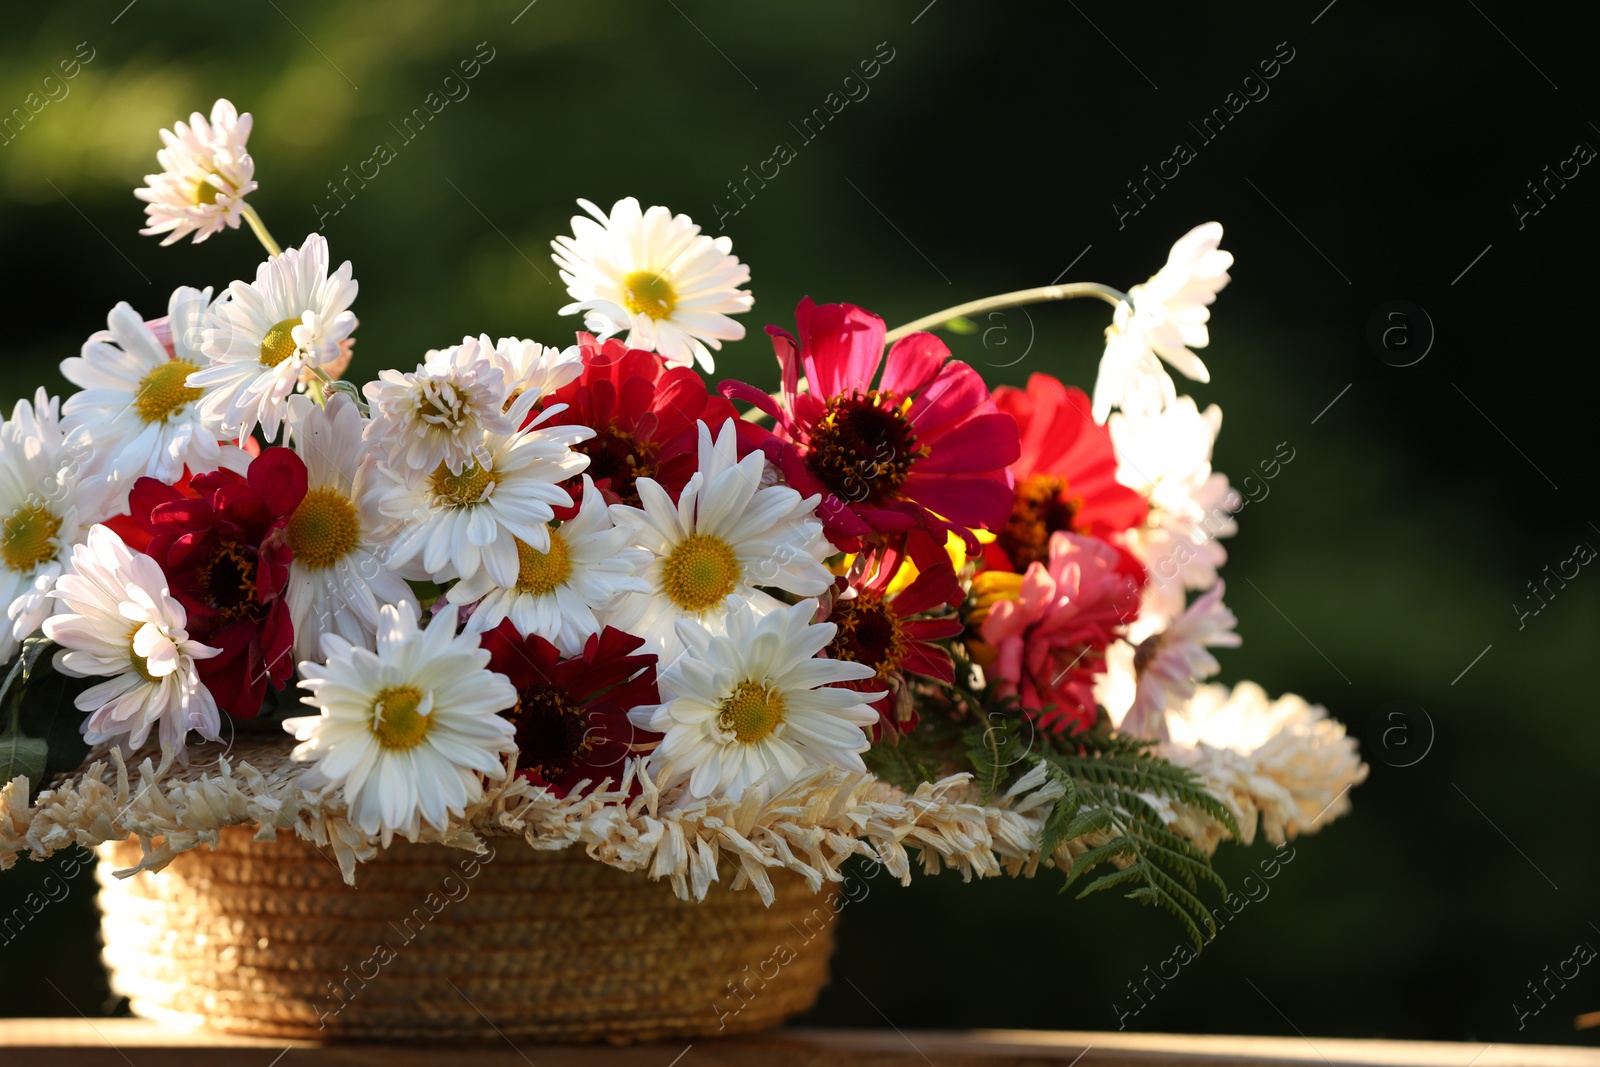 Photo of Beautiful wild flowers in wicker basket on wooden table against blurred background